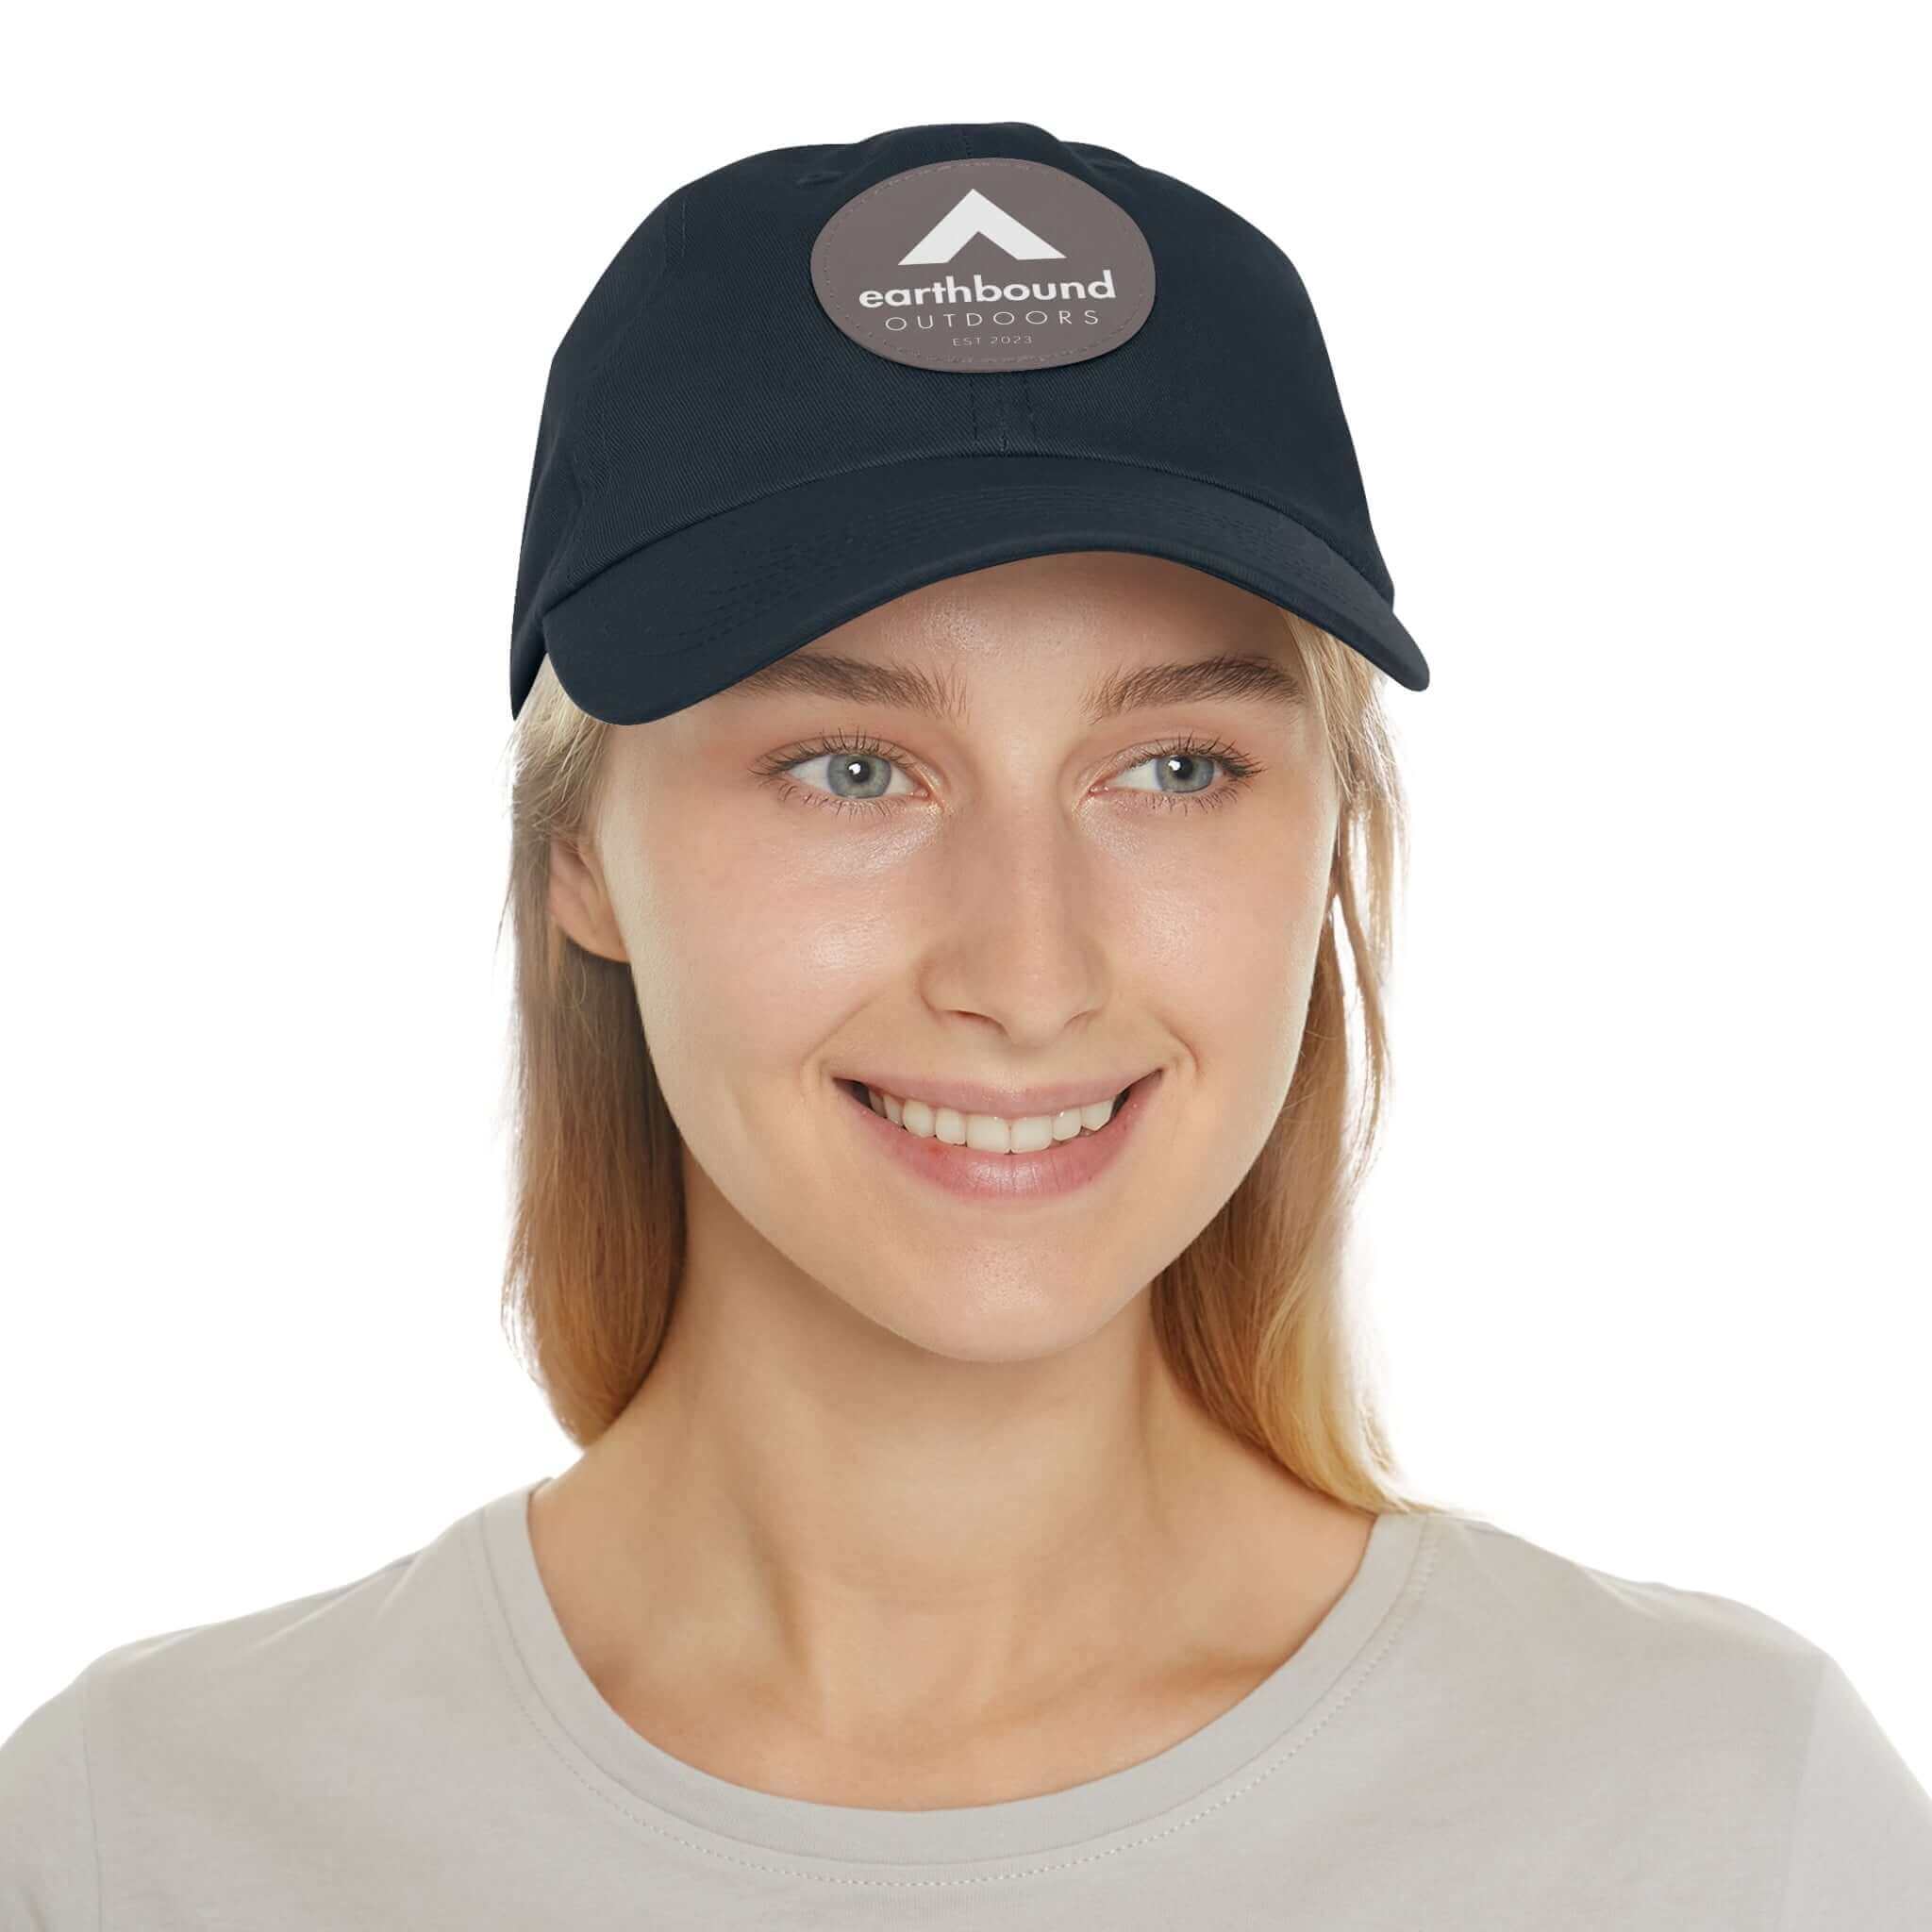 Earthbound Outdoors Dad Hat with Leather Patch